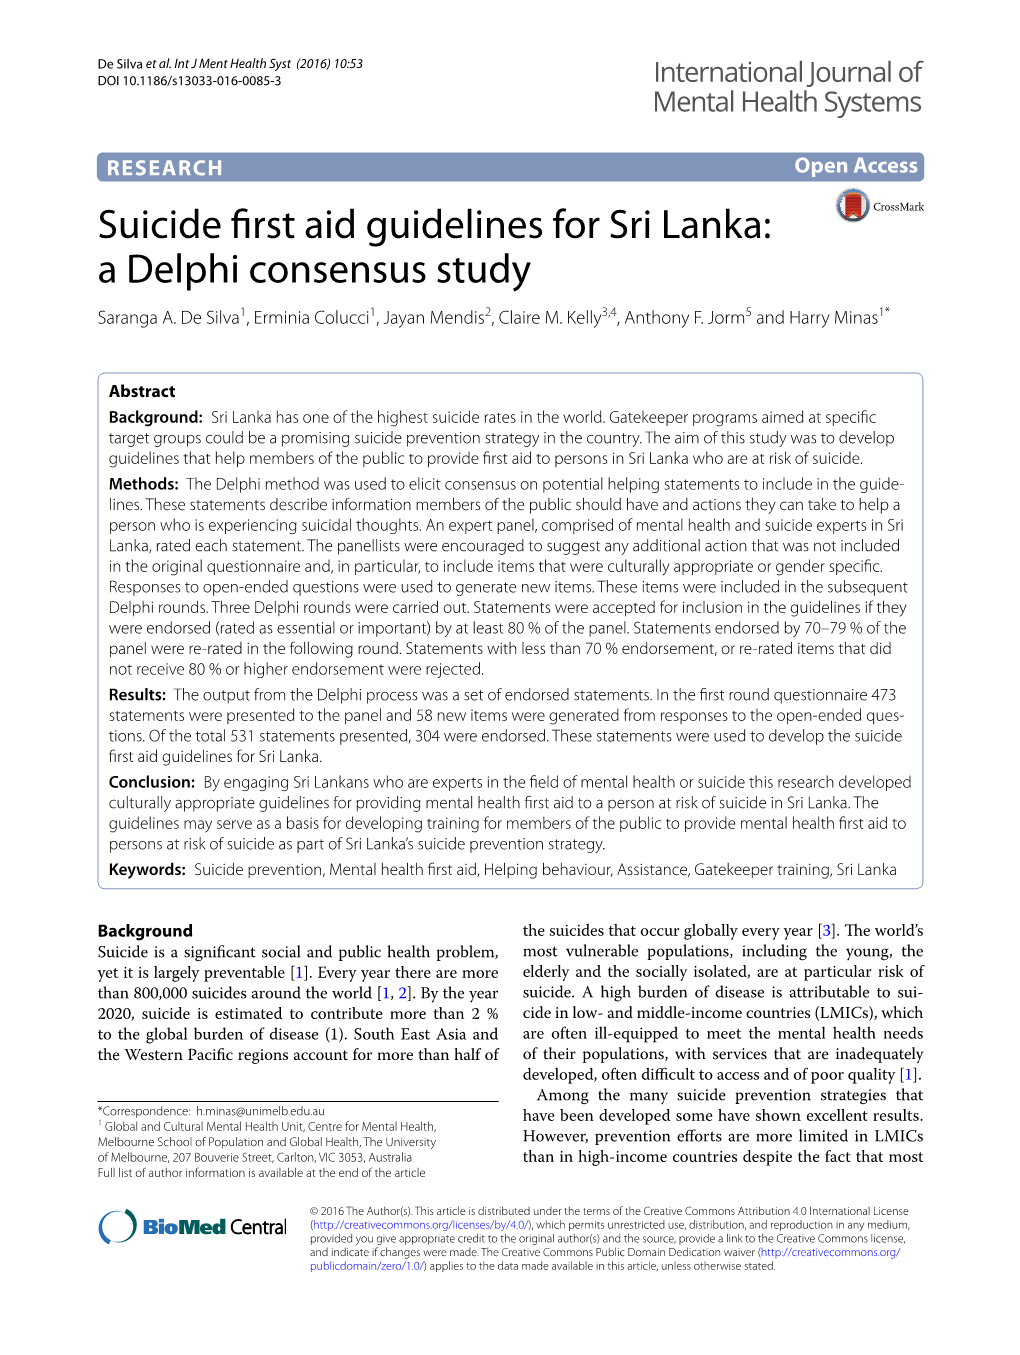 Suicide First Aid Guidelines for Sri Lanka: a Delphi Consensus Study Saranga A